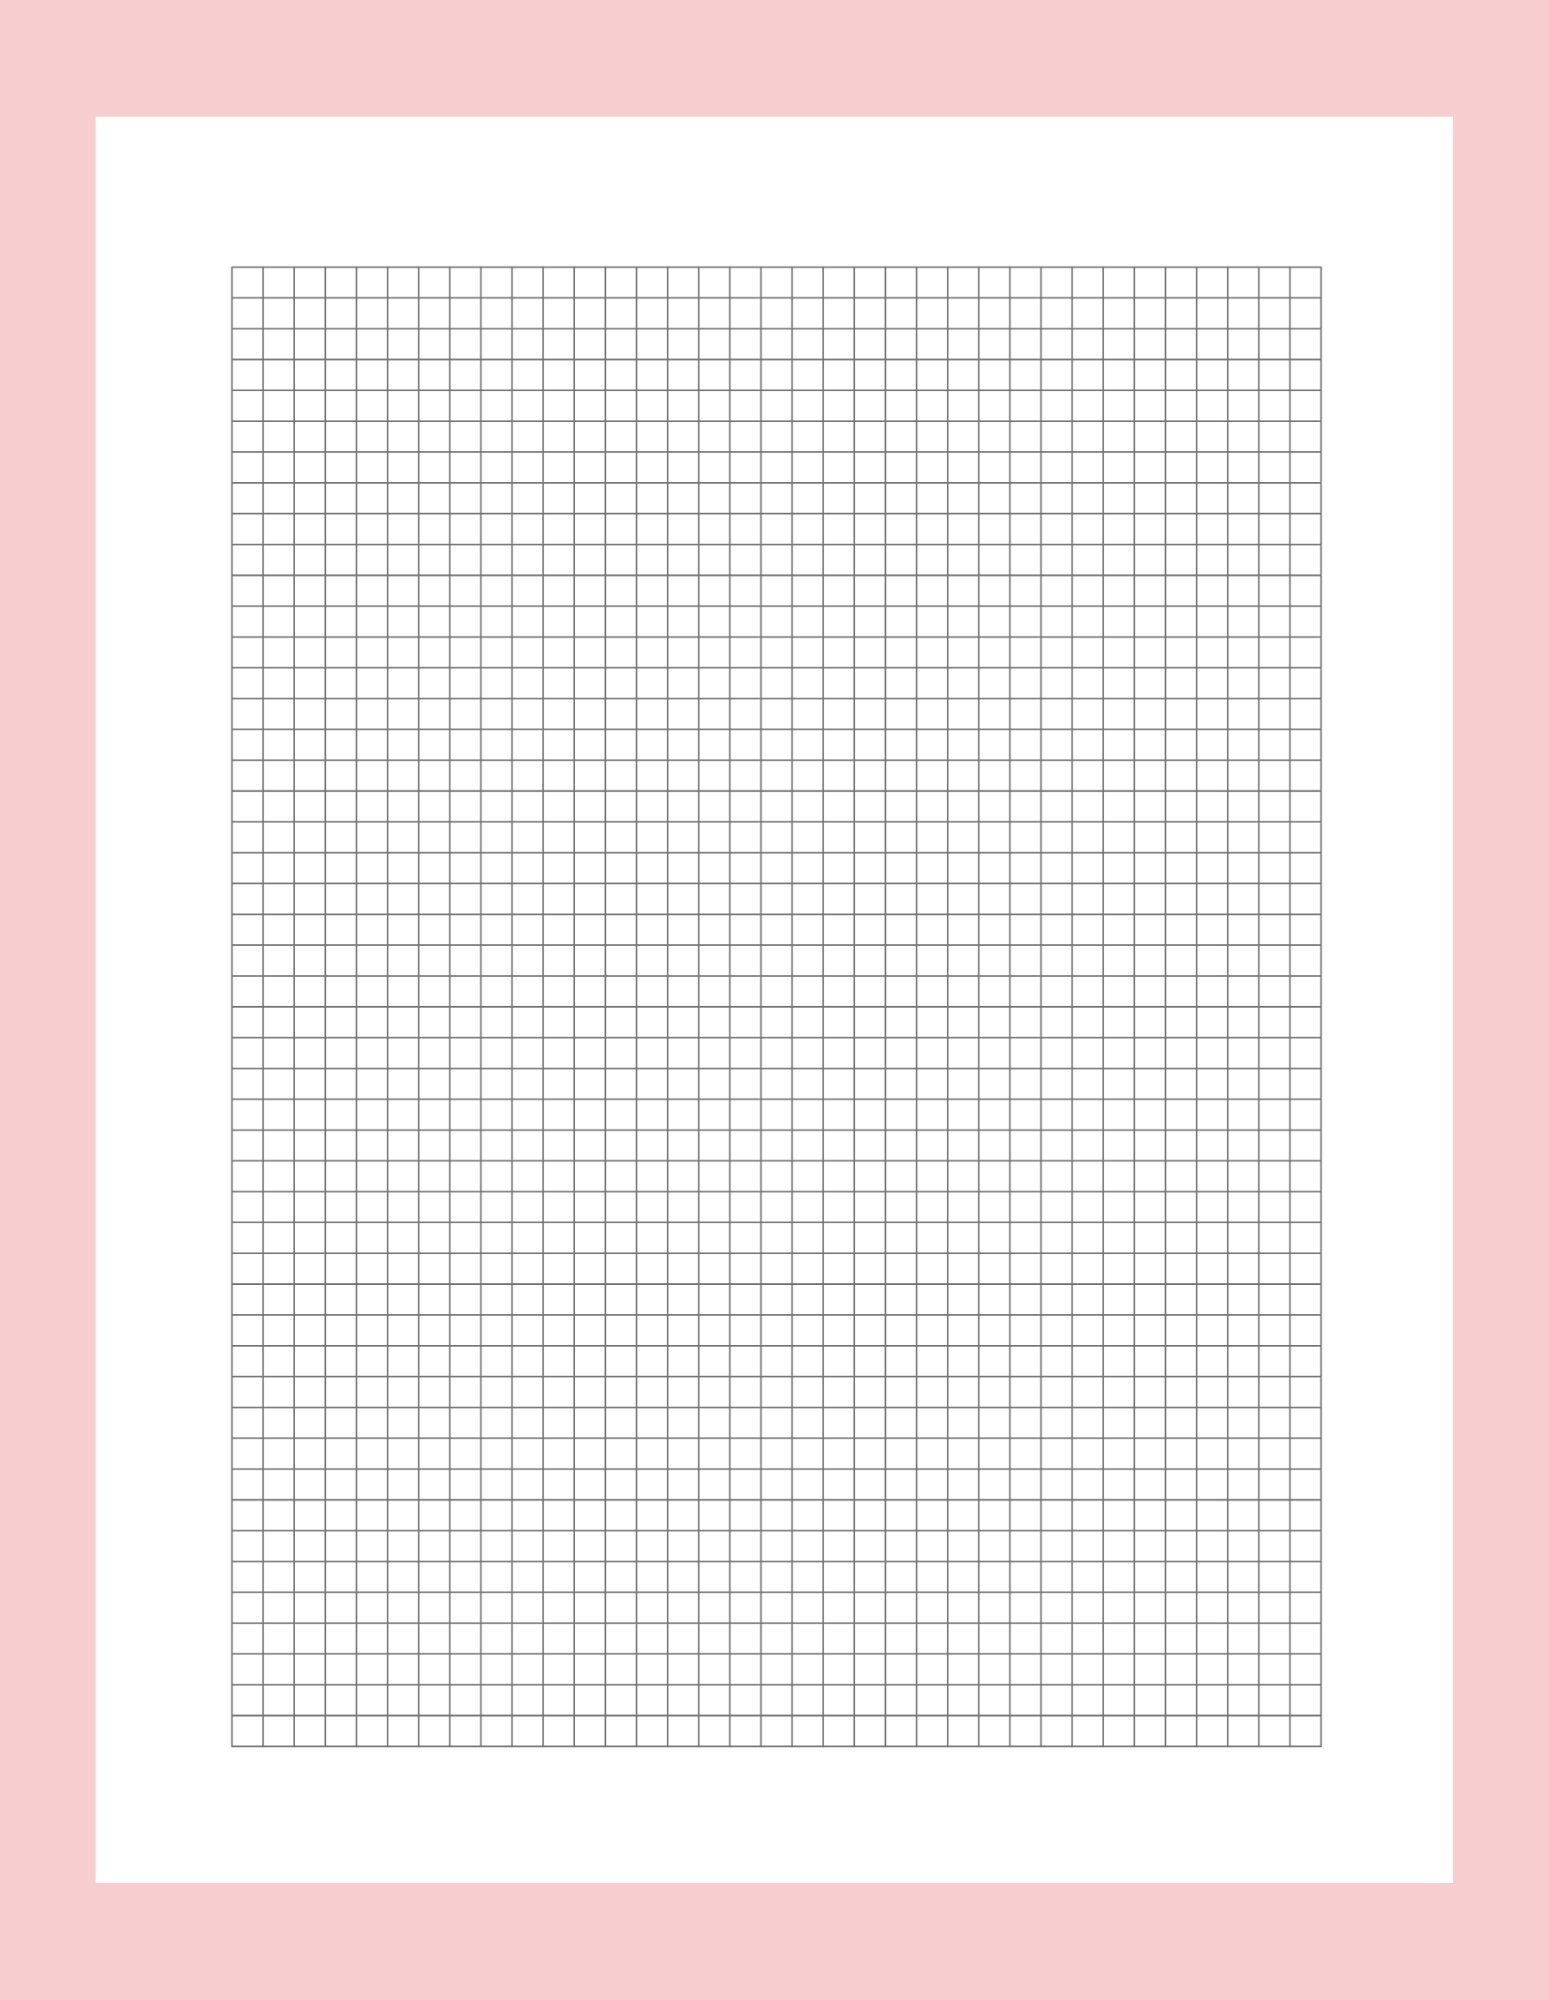 25 Pack of Large Sheet Format 1/4 Graph Paper 36 X 24 Black Lines